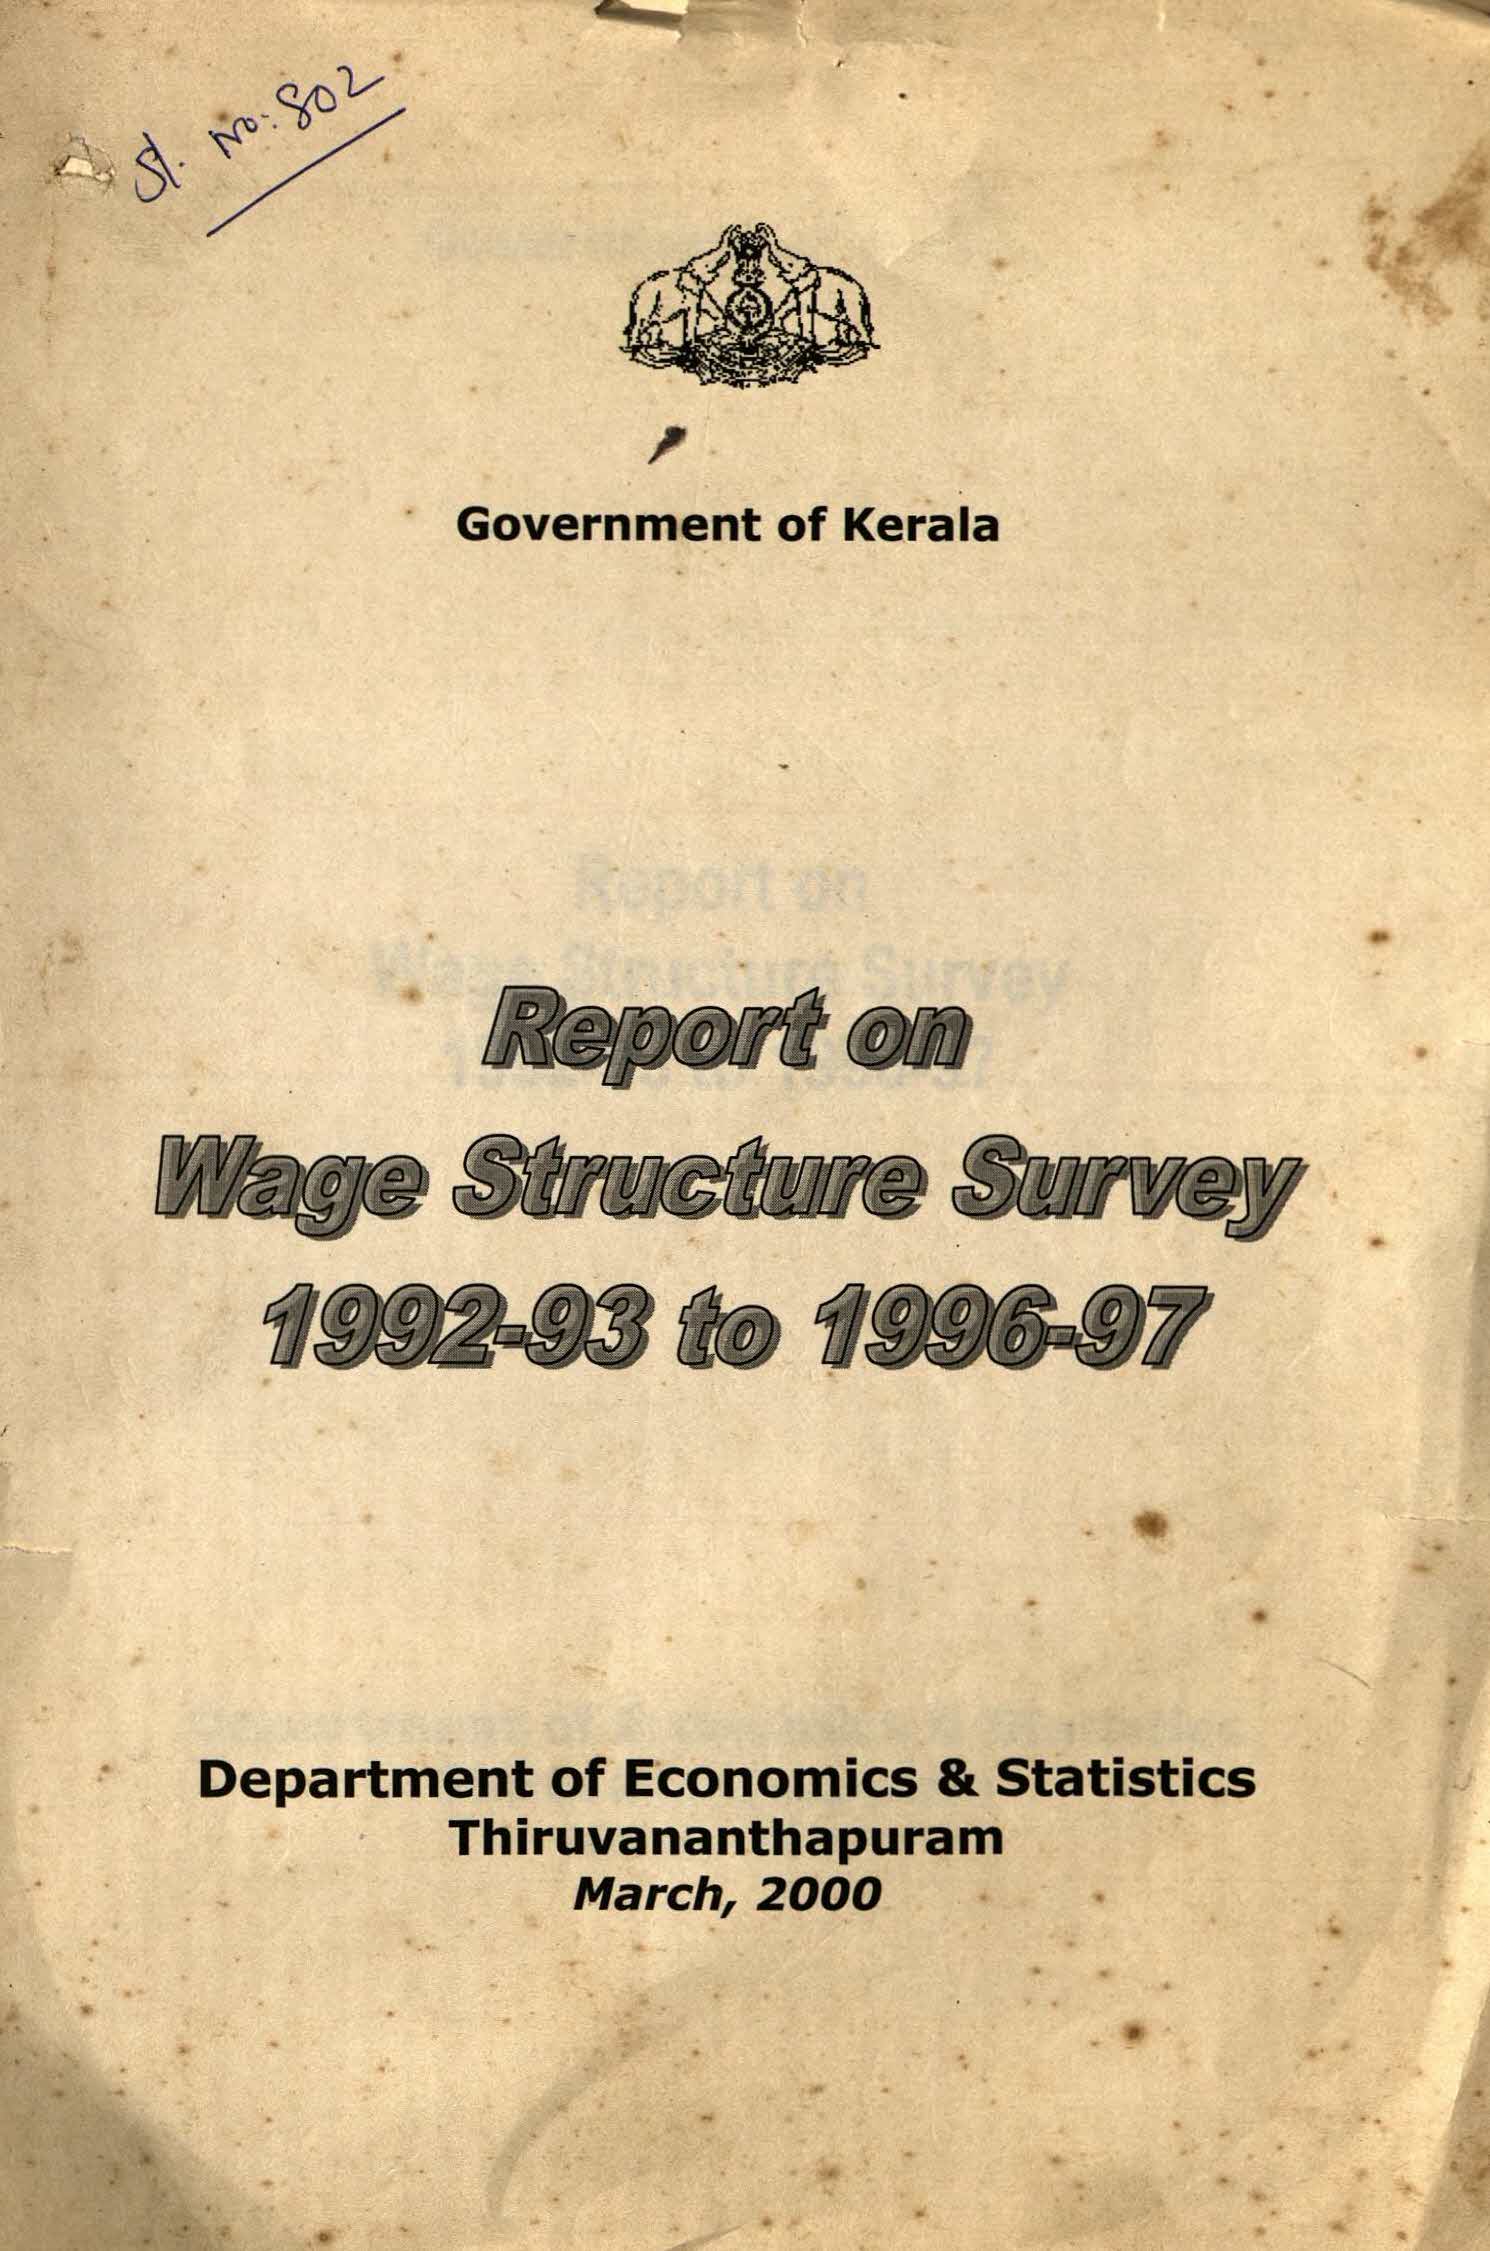 Wage Structure Survey 1992-93 to 1996-97